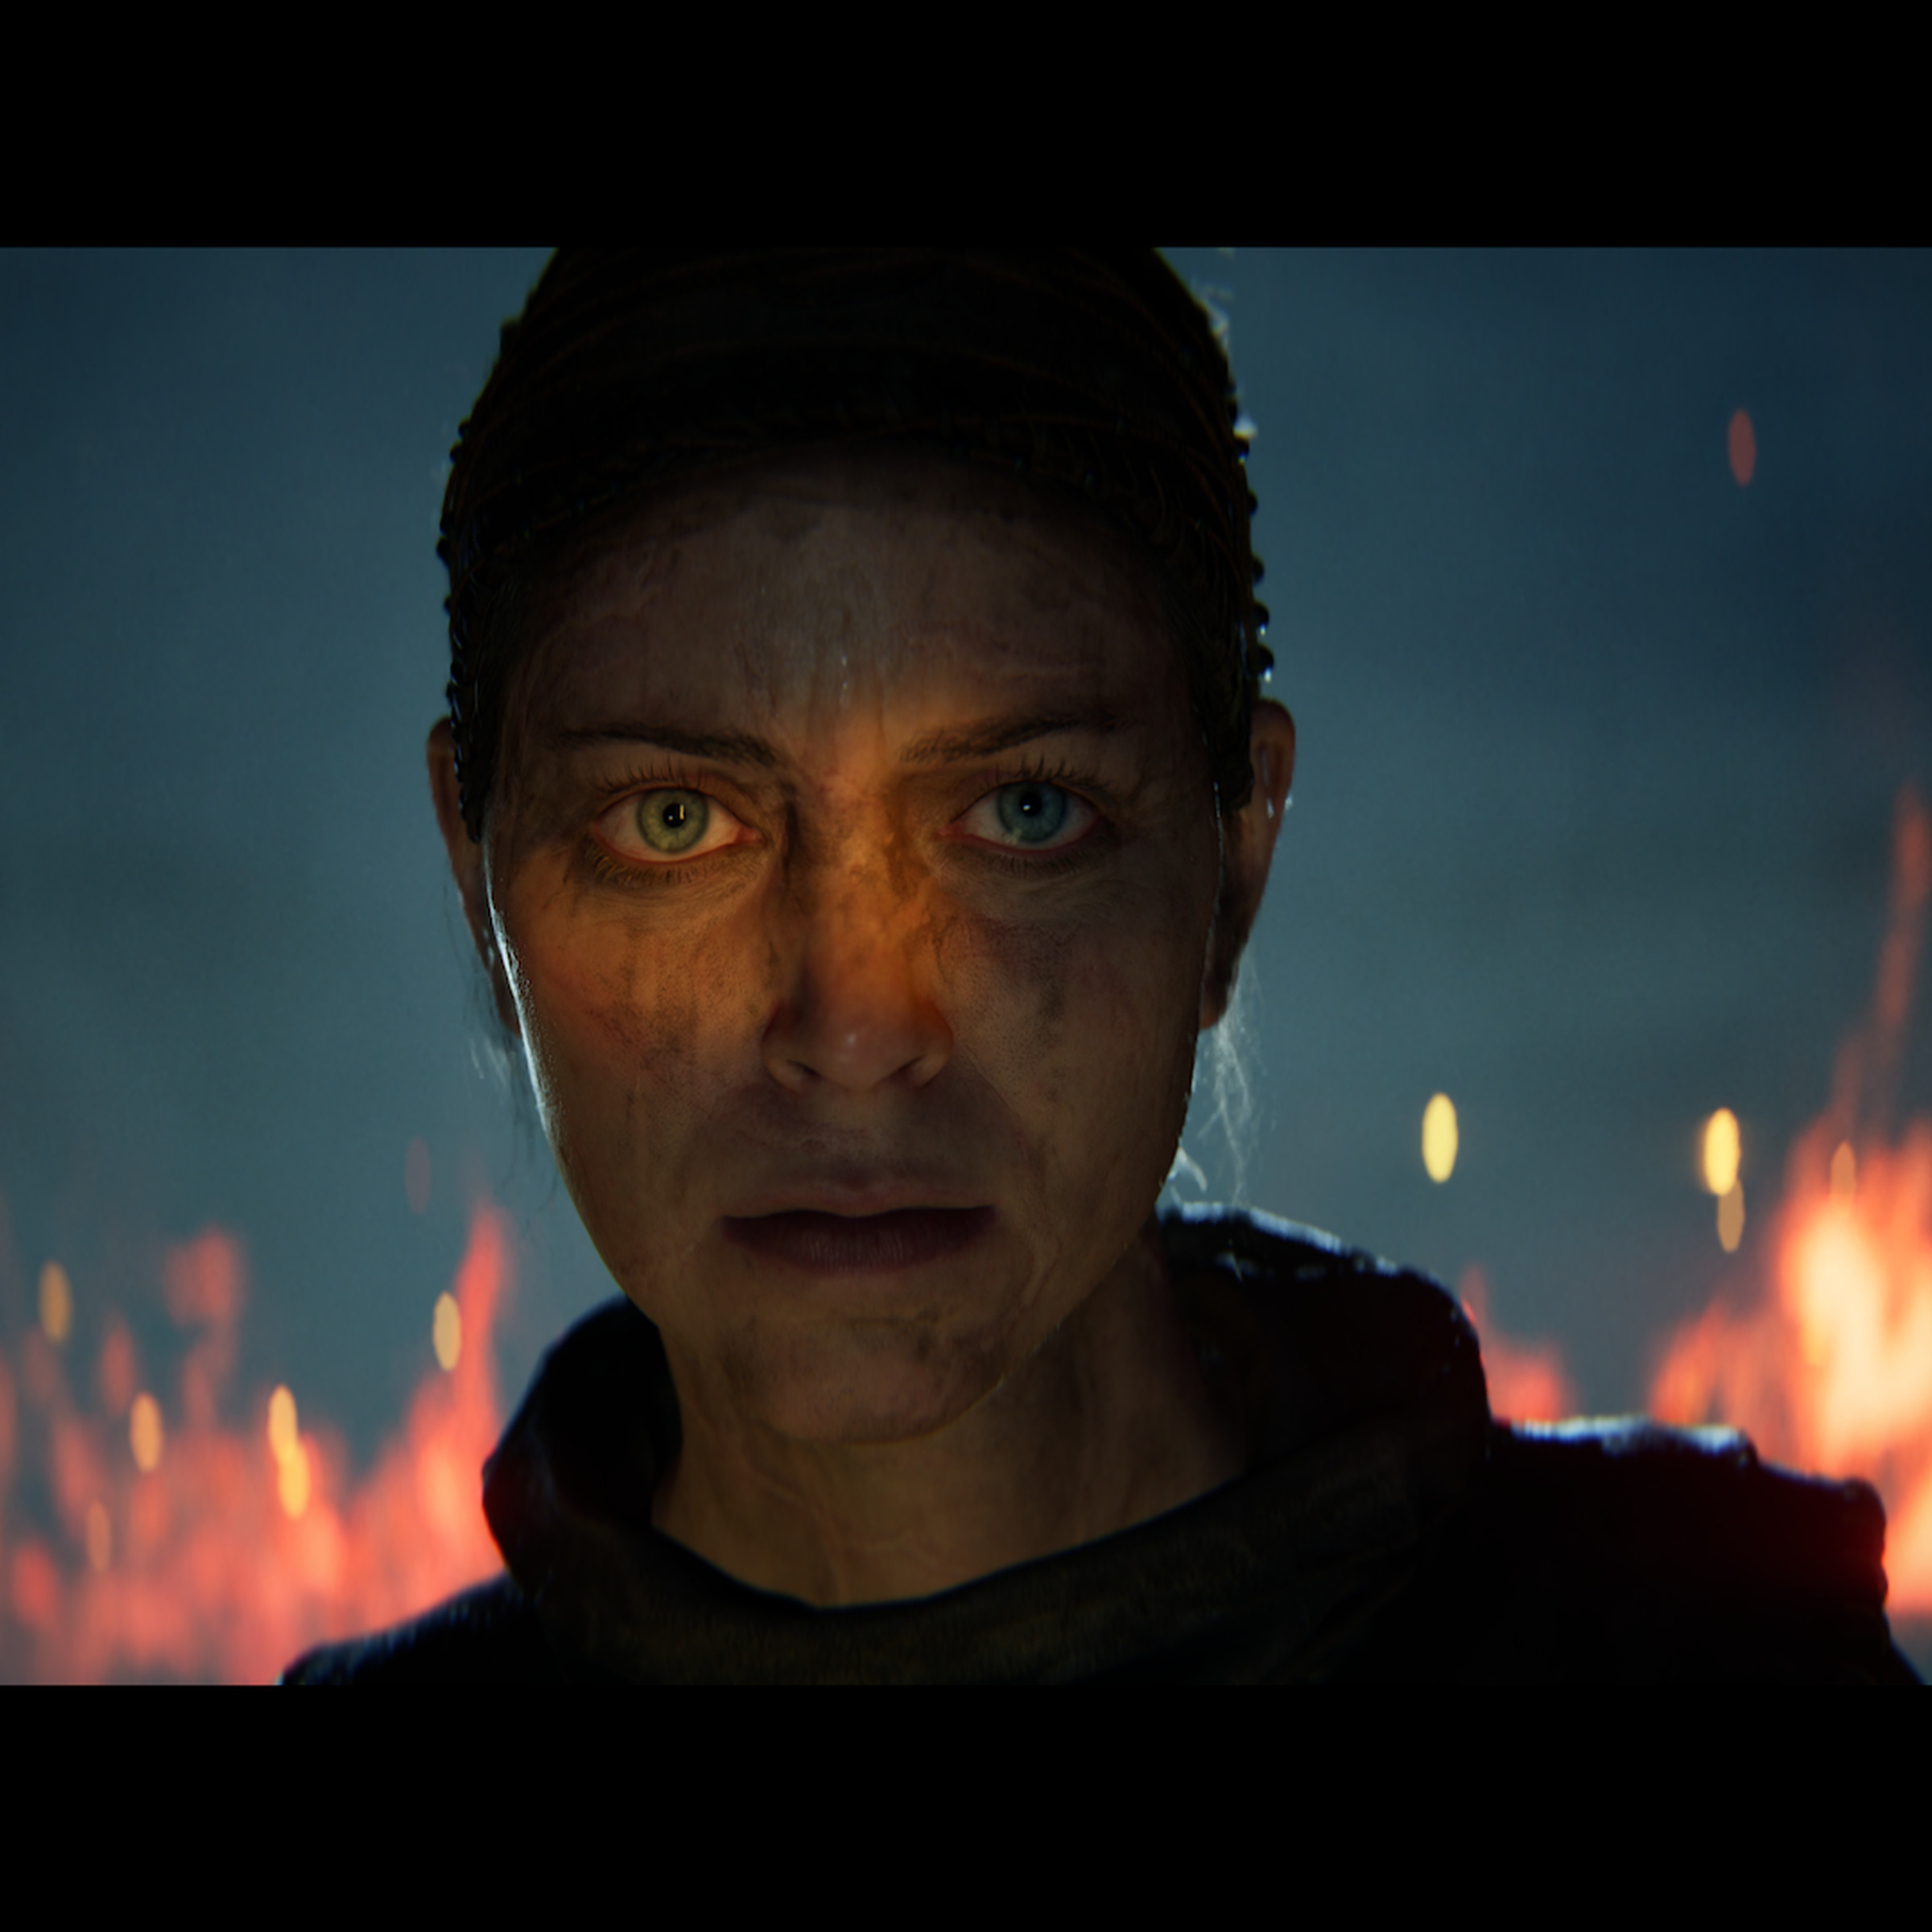 Screenshot from Senua’s Saga: Hellblade II featuring a close up shot of Senua, a woman covered in grime with flames burning behind her.